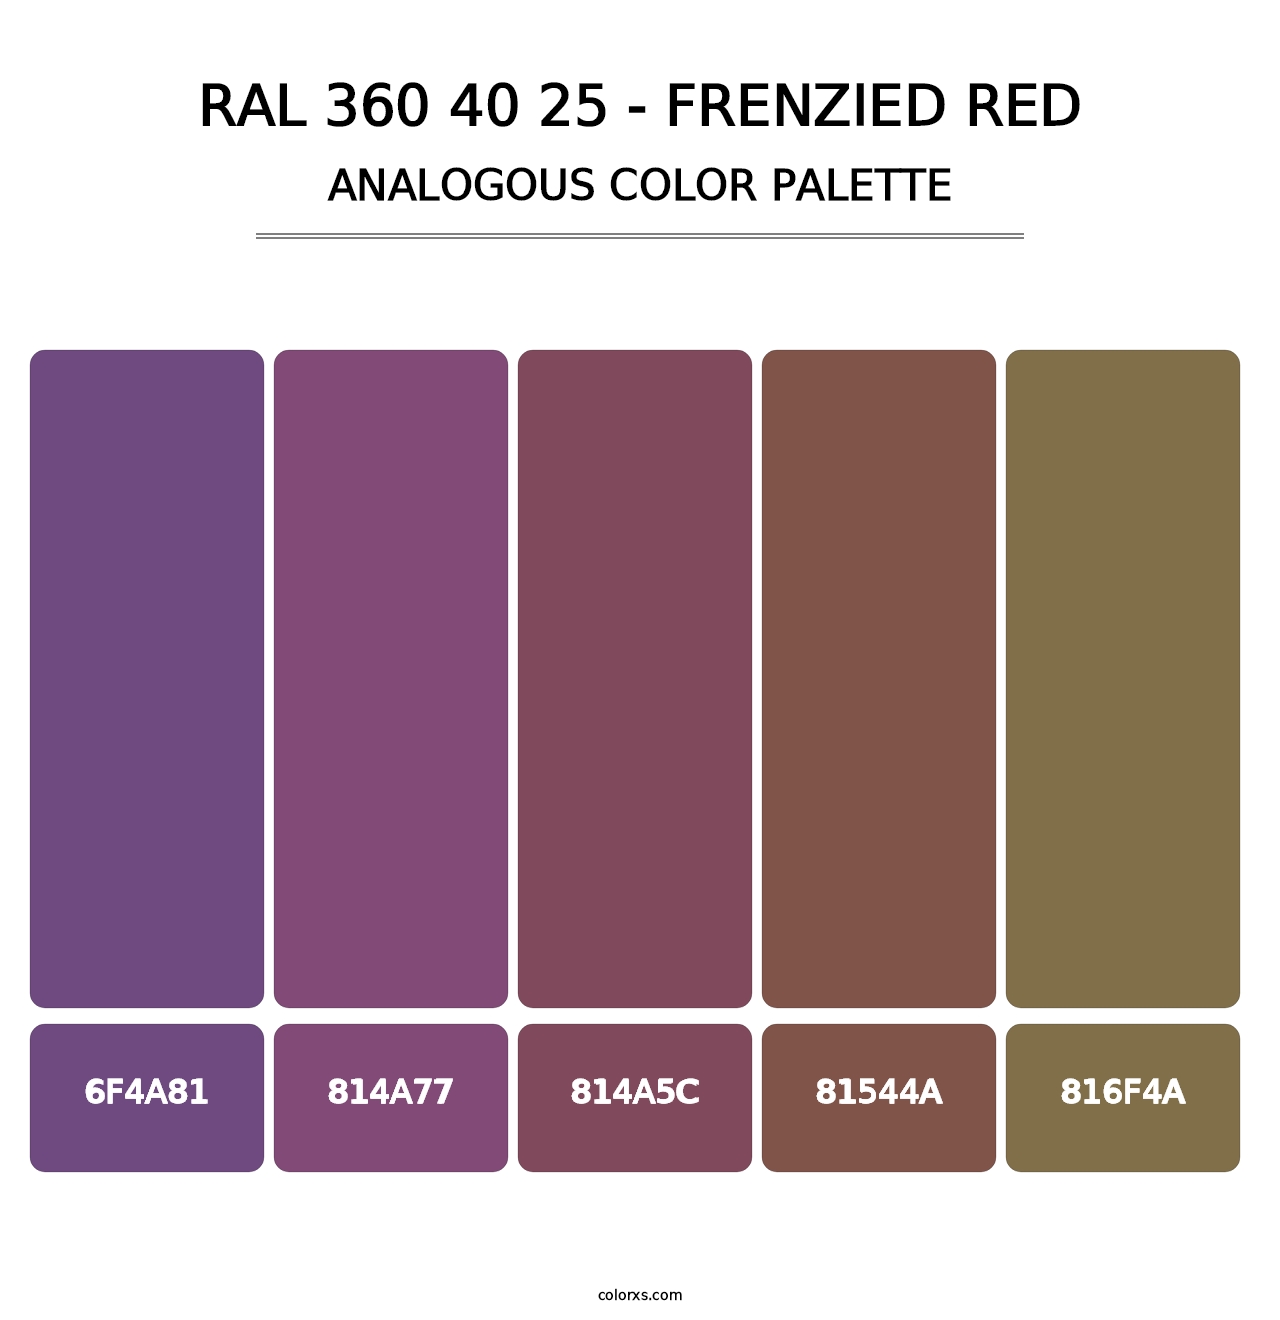 RAL 360 40 25 - Frenzied Red - Analogous Color Palette